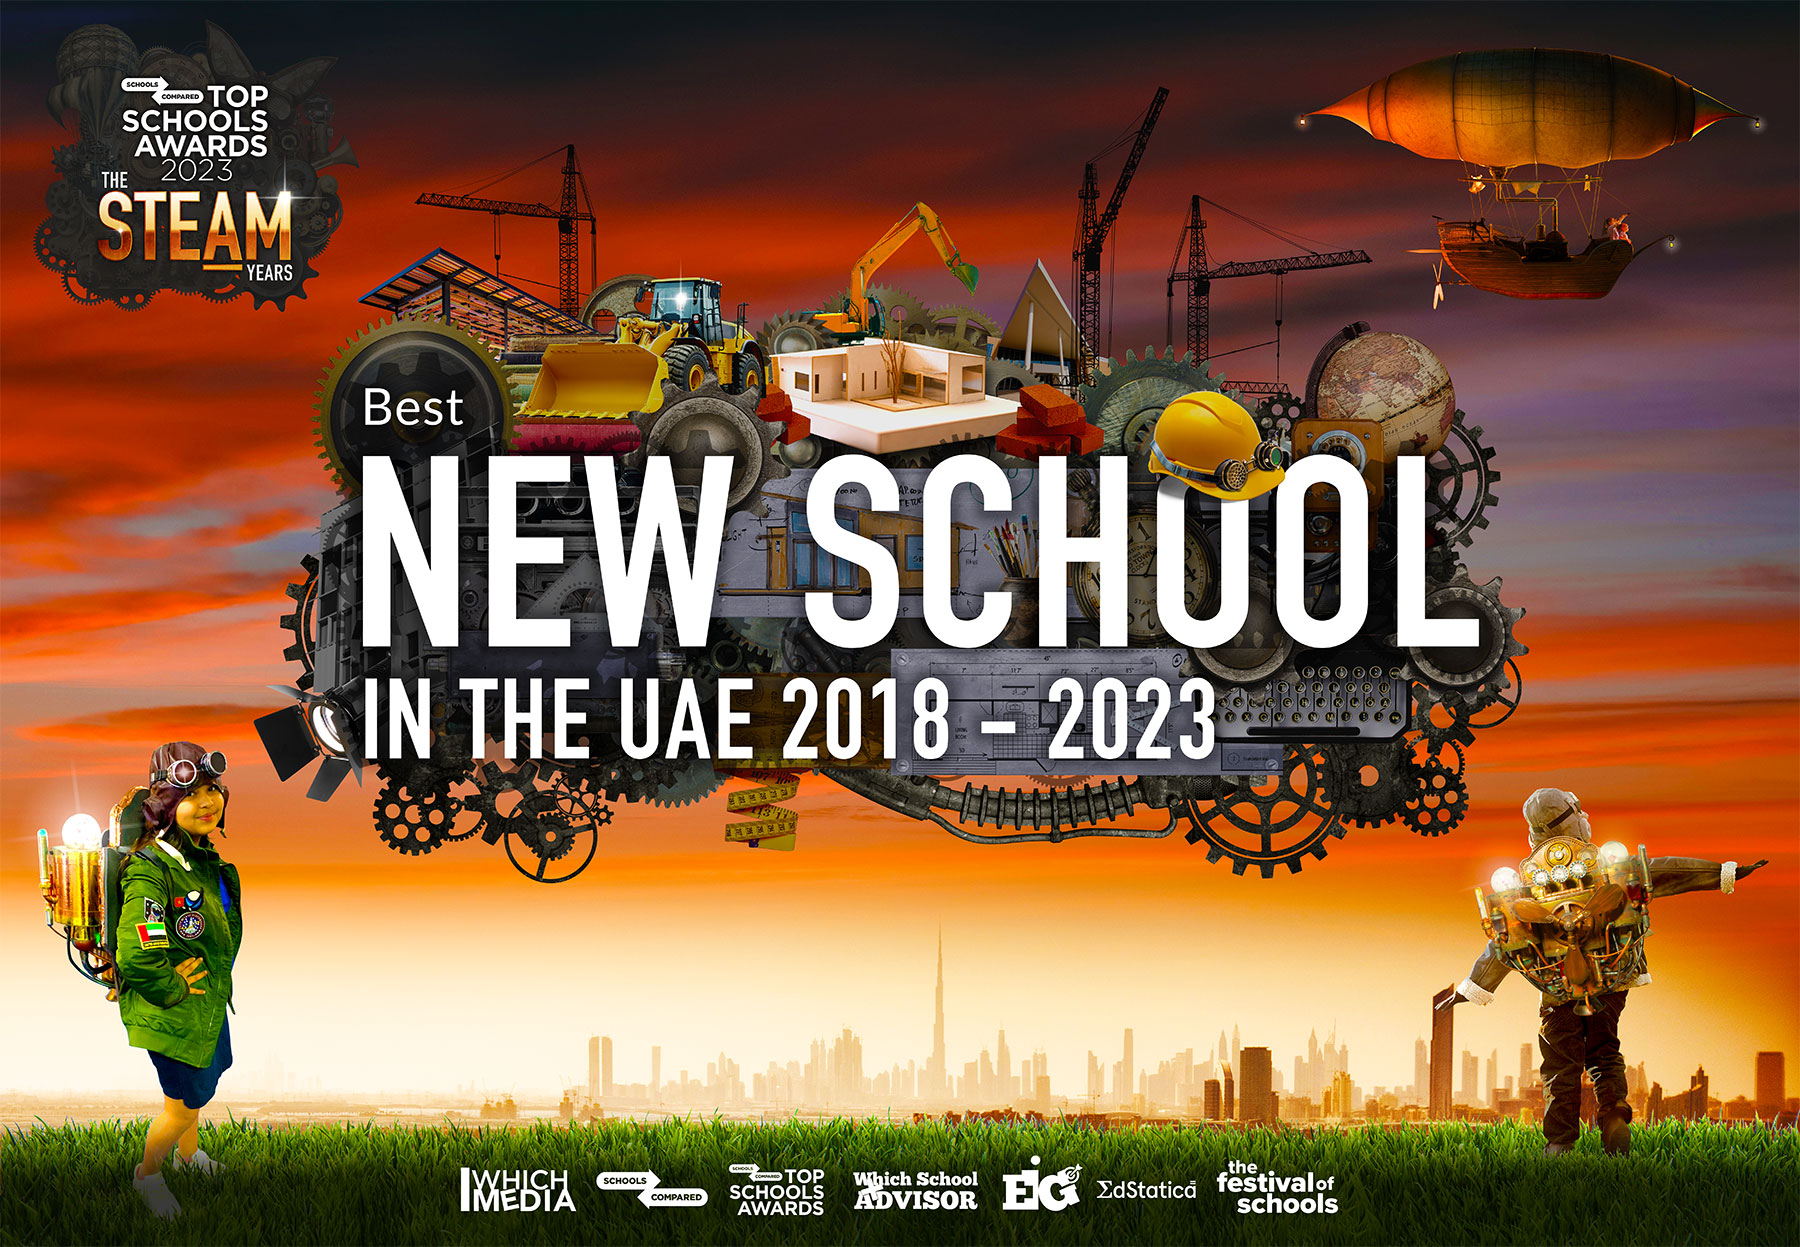 Top Schools Awards 2023. Award for Best New School in the UAE 2018 - 2023. Image shows a young student and aspiring engineer testing a Jet Pack as part of the Top Schools Awards and its focus on recognising the importance of STEAM in education